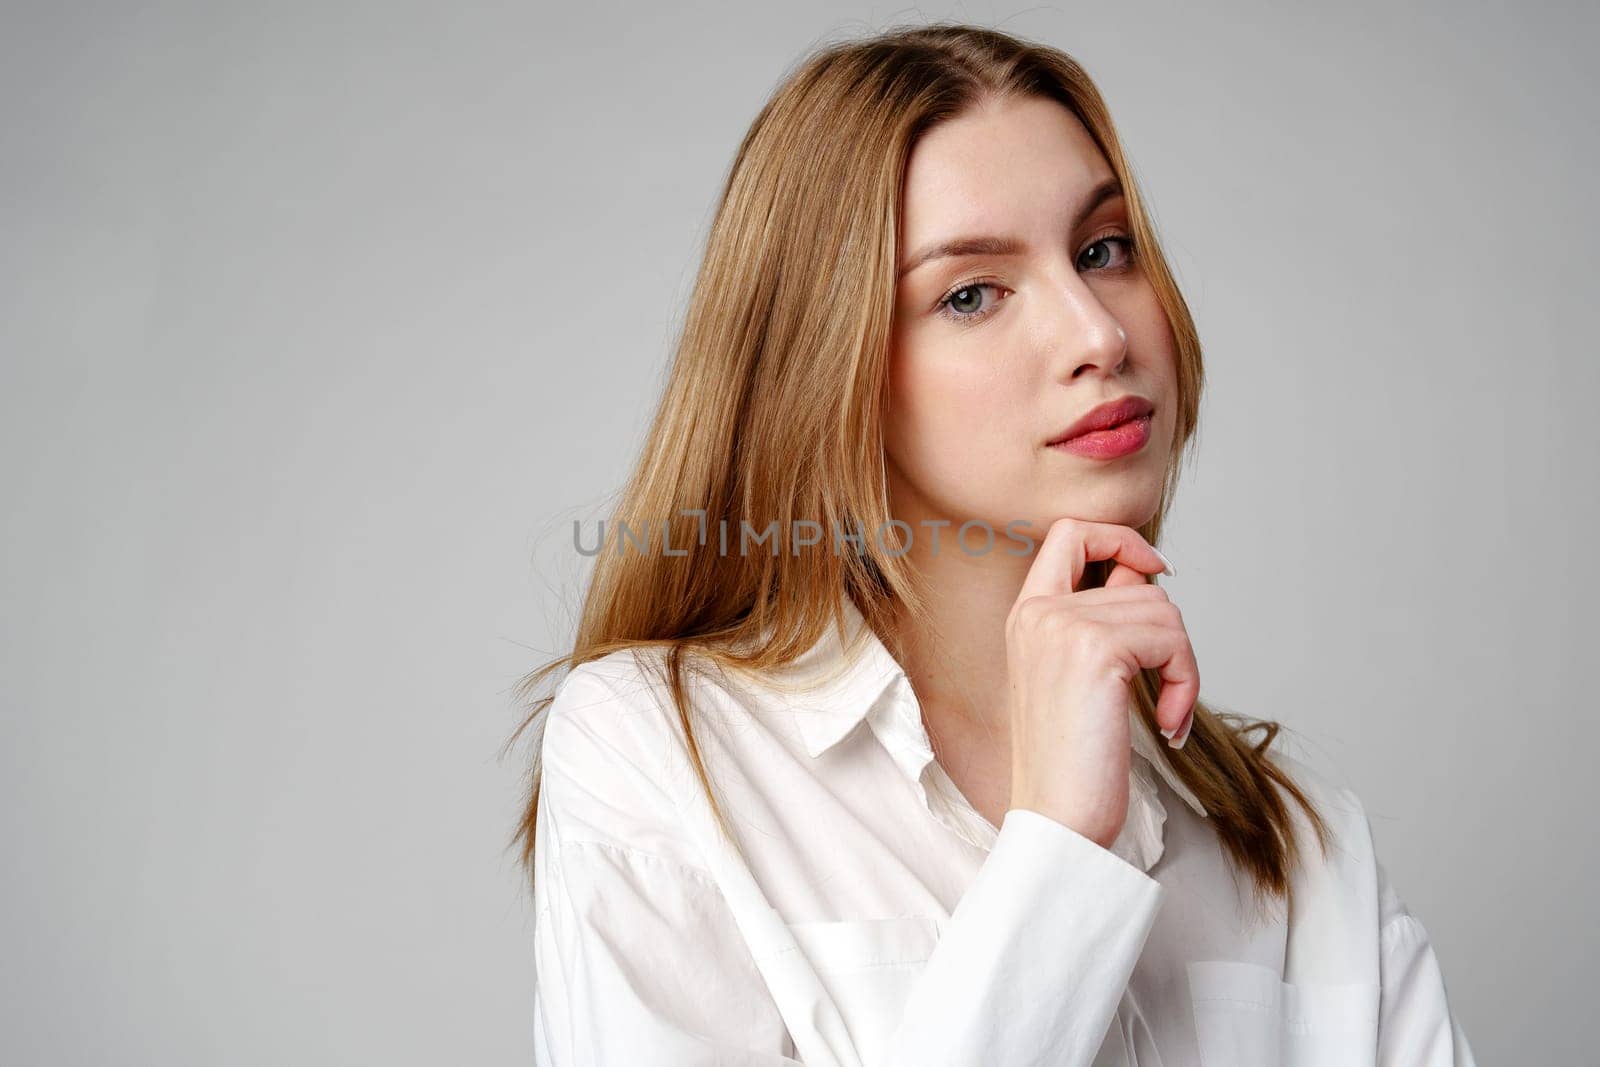 Concerned Young Woman deep in thought or contemplation on gray background